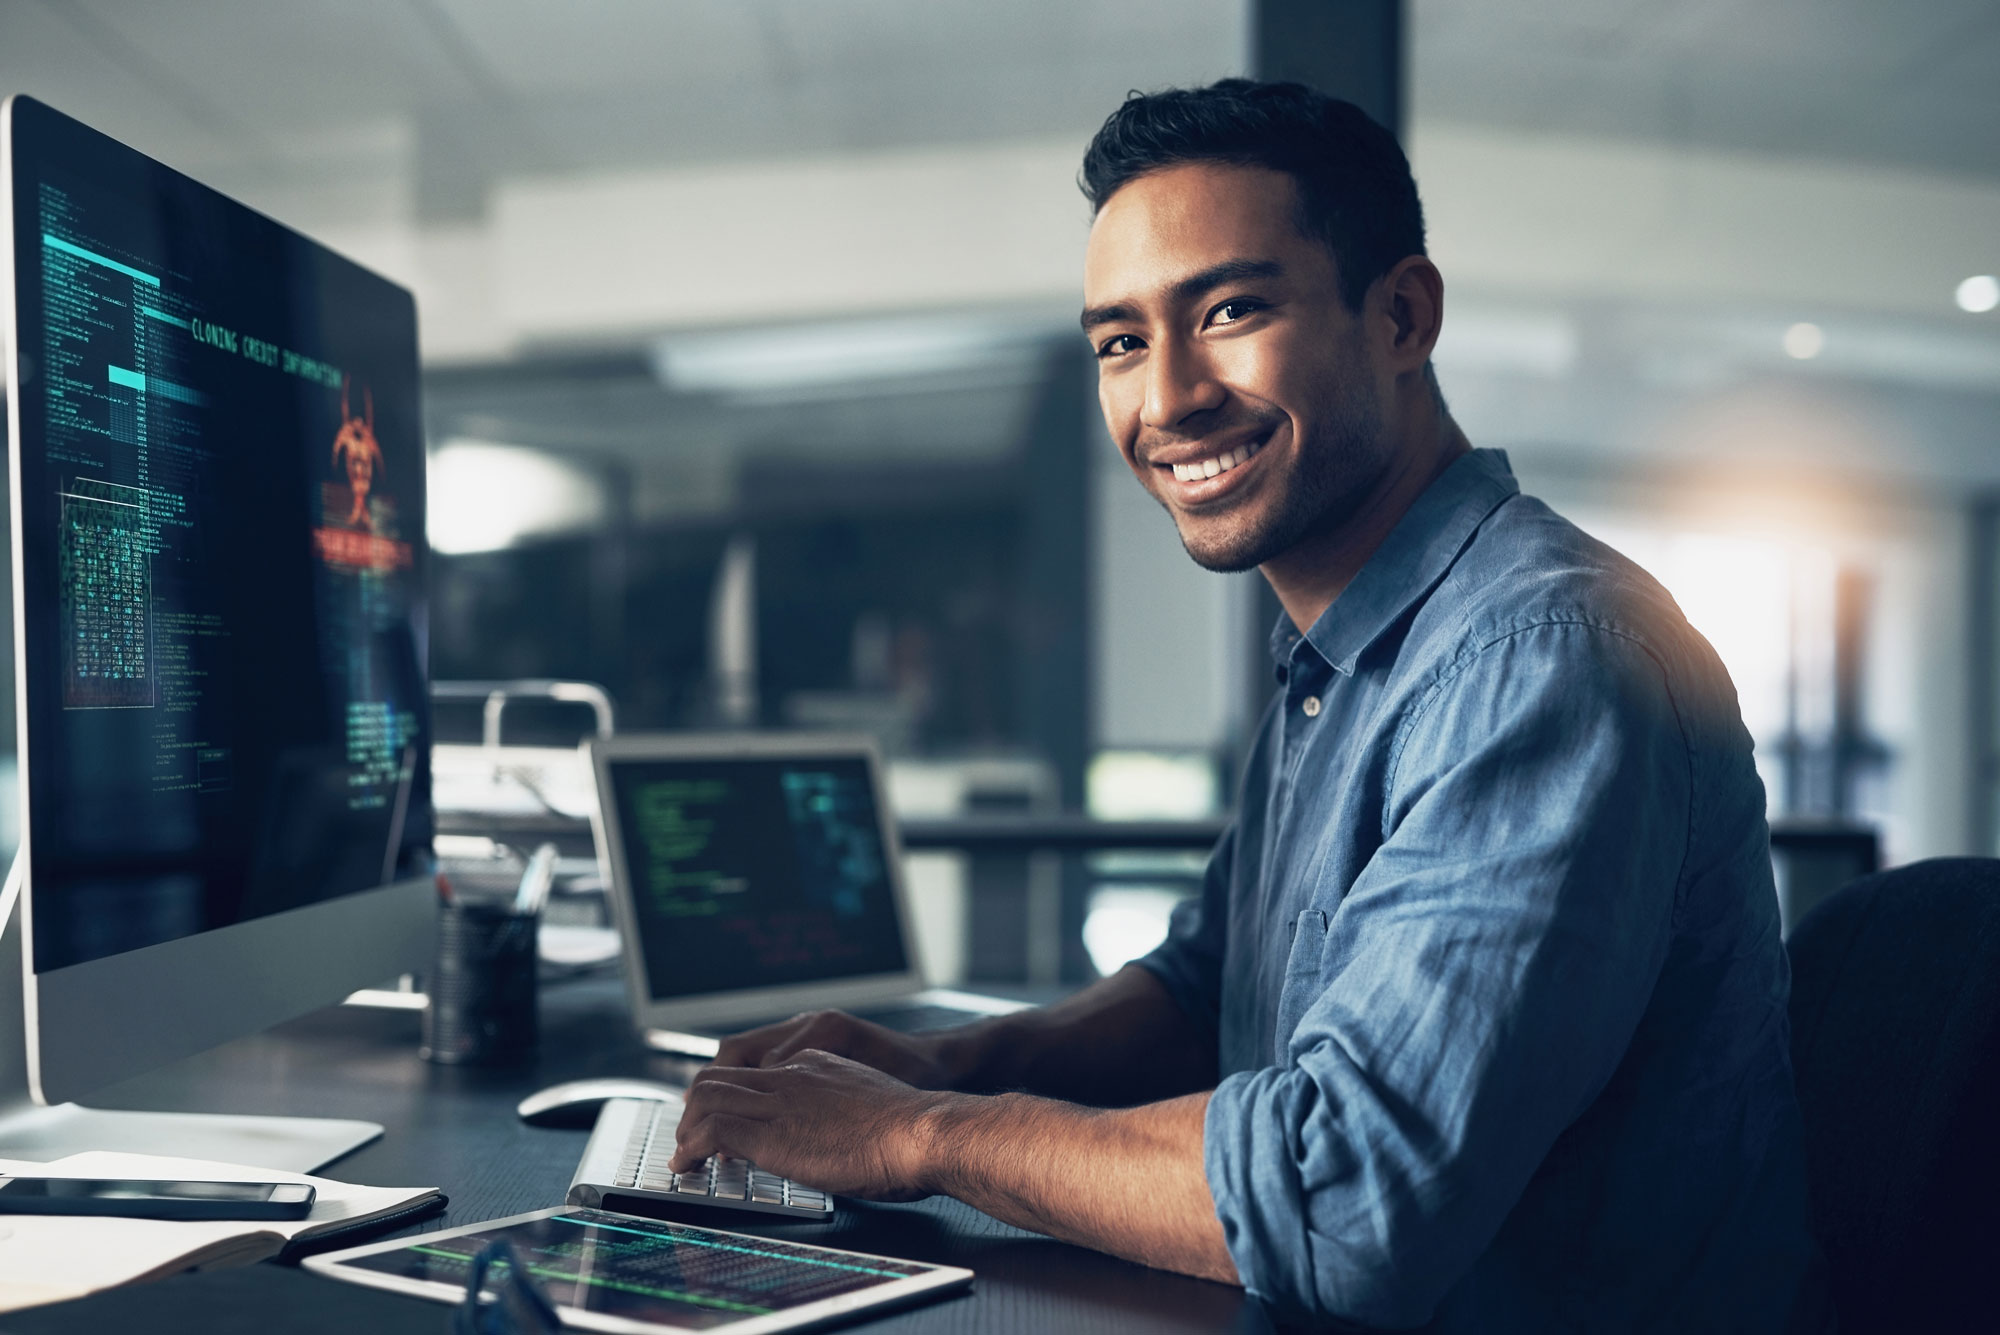 man smiling at a computer desk while working